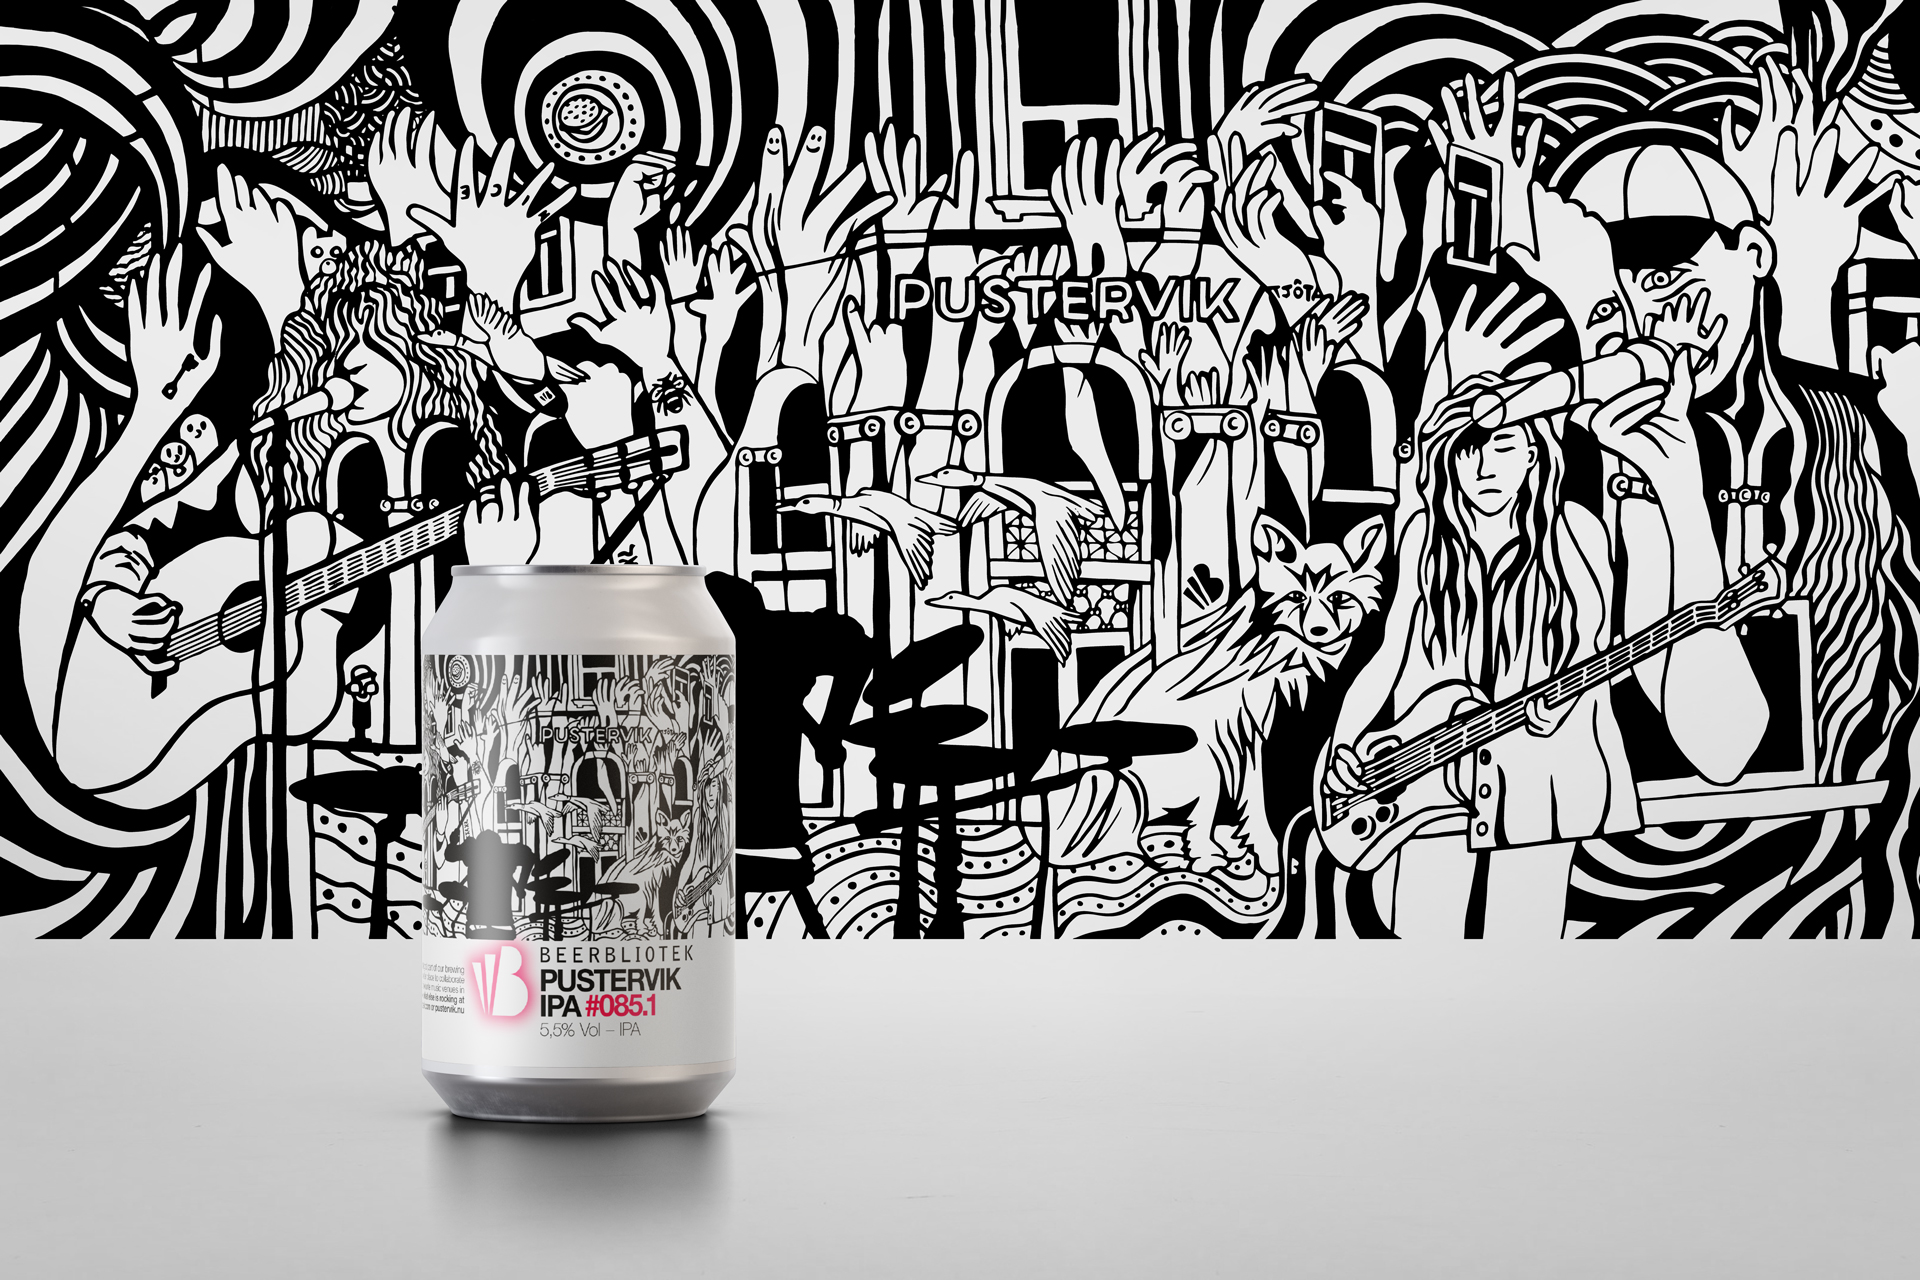 A can of Pustervik IPA along with the artwork that will hang on the wall at Pustervik.